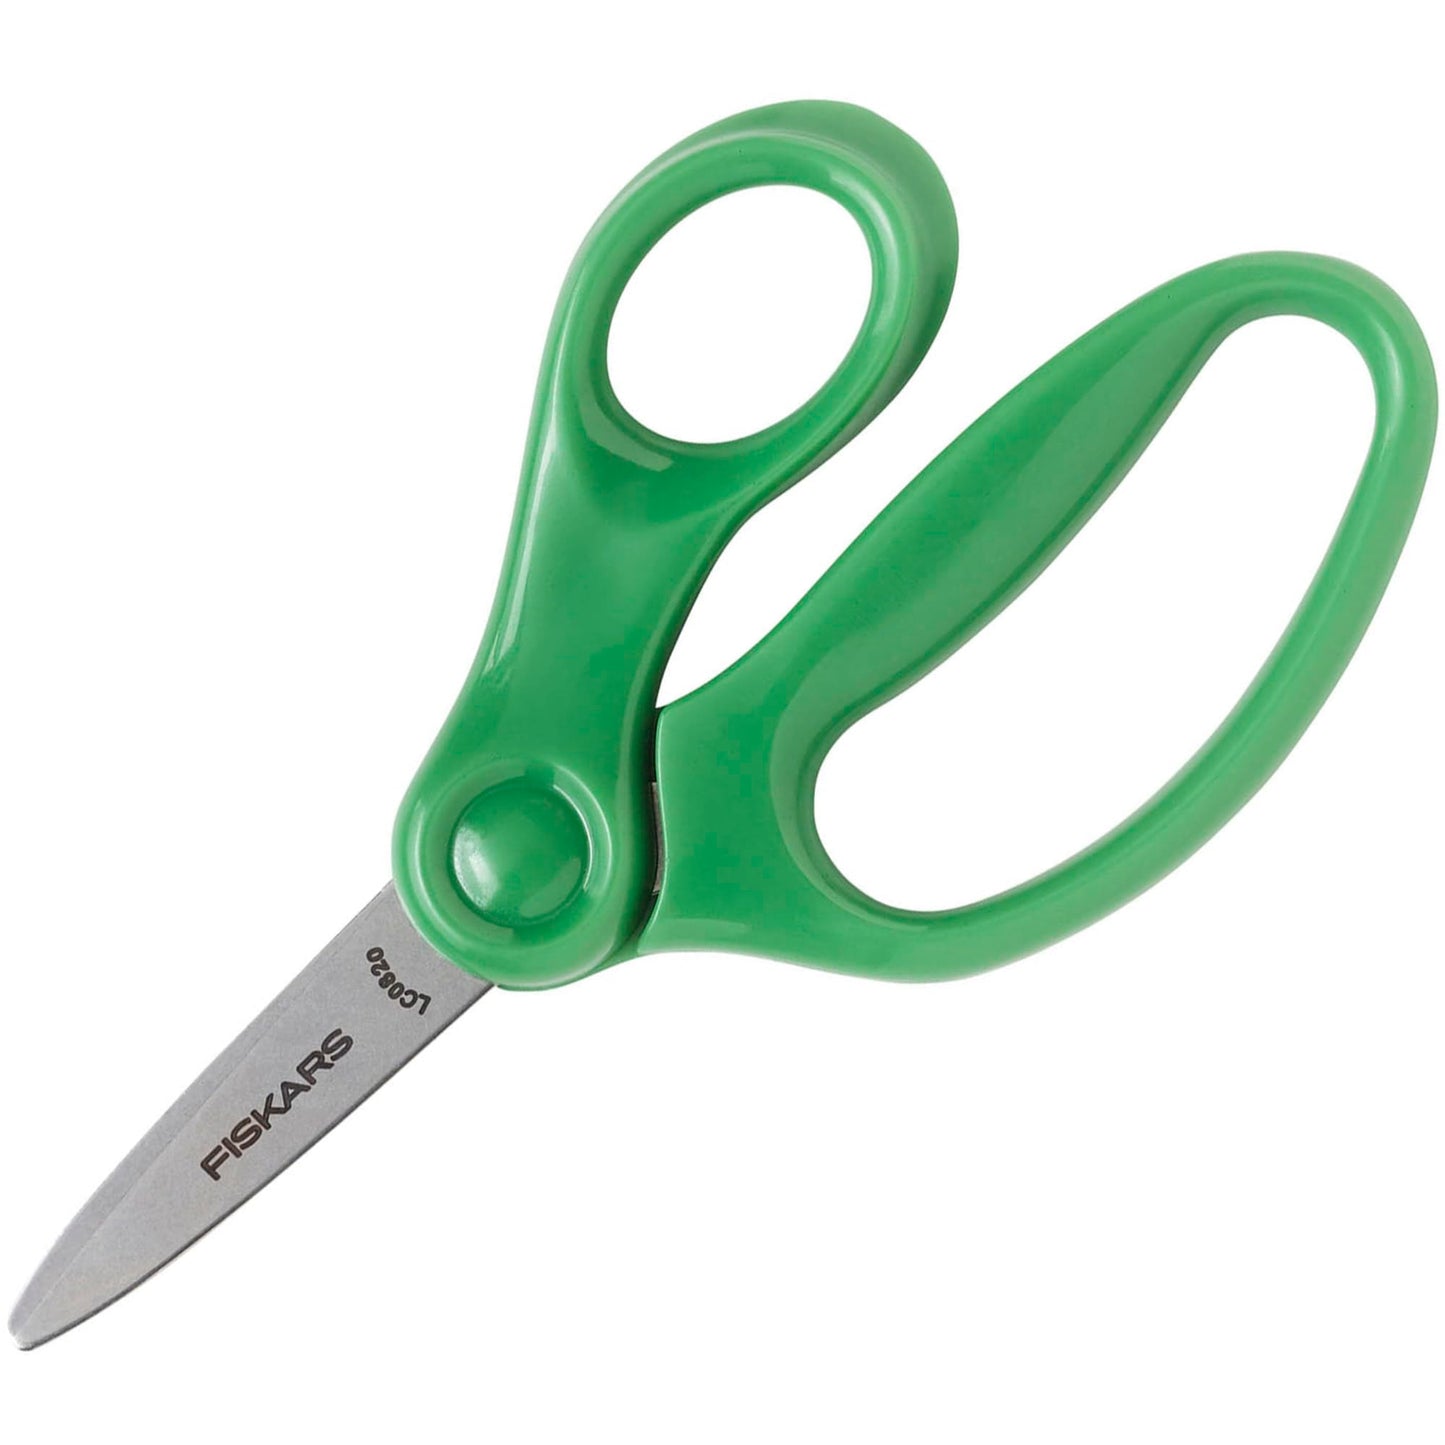 Fiskars 5" Pointed-Tip Scissors for Kids 4+ - Scissors for School or Crafting - Back to School Supplies - Color May Vary